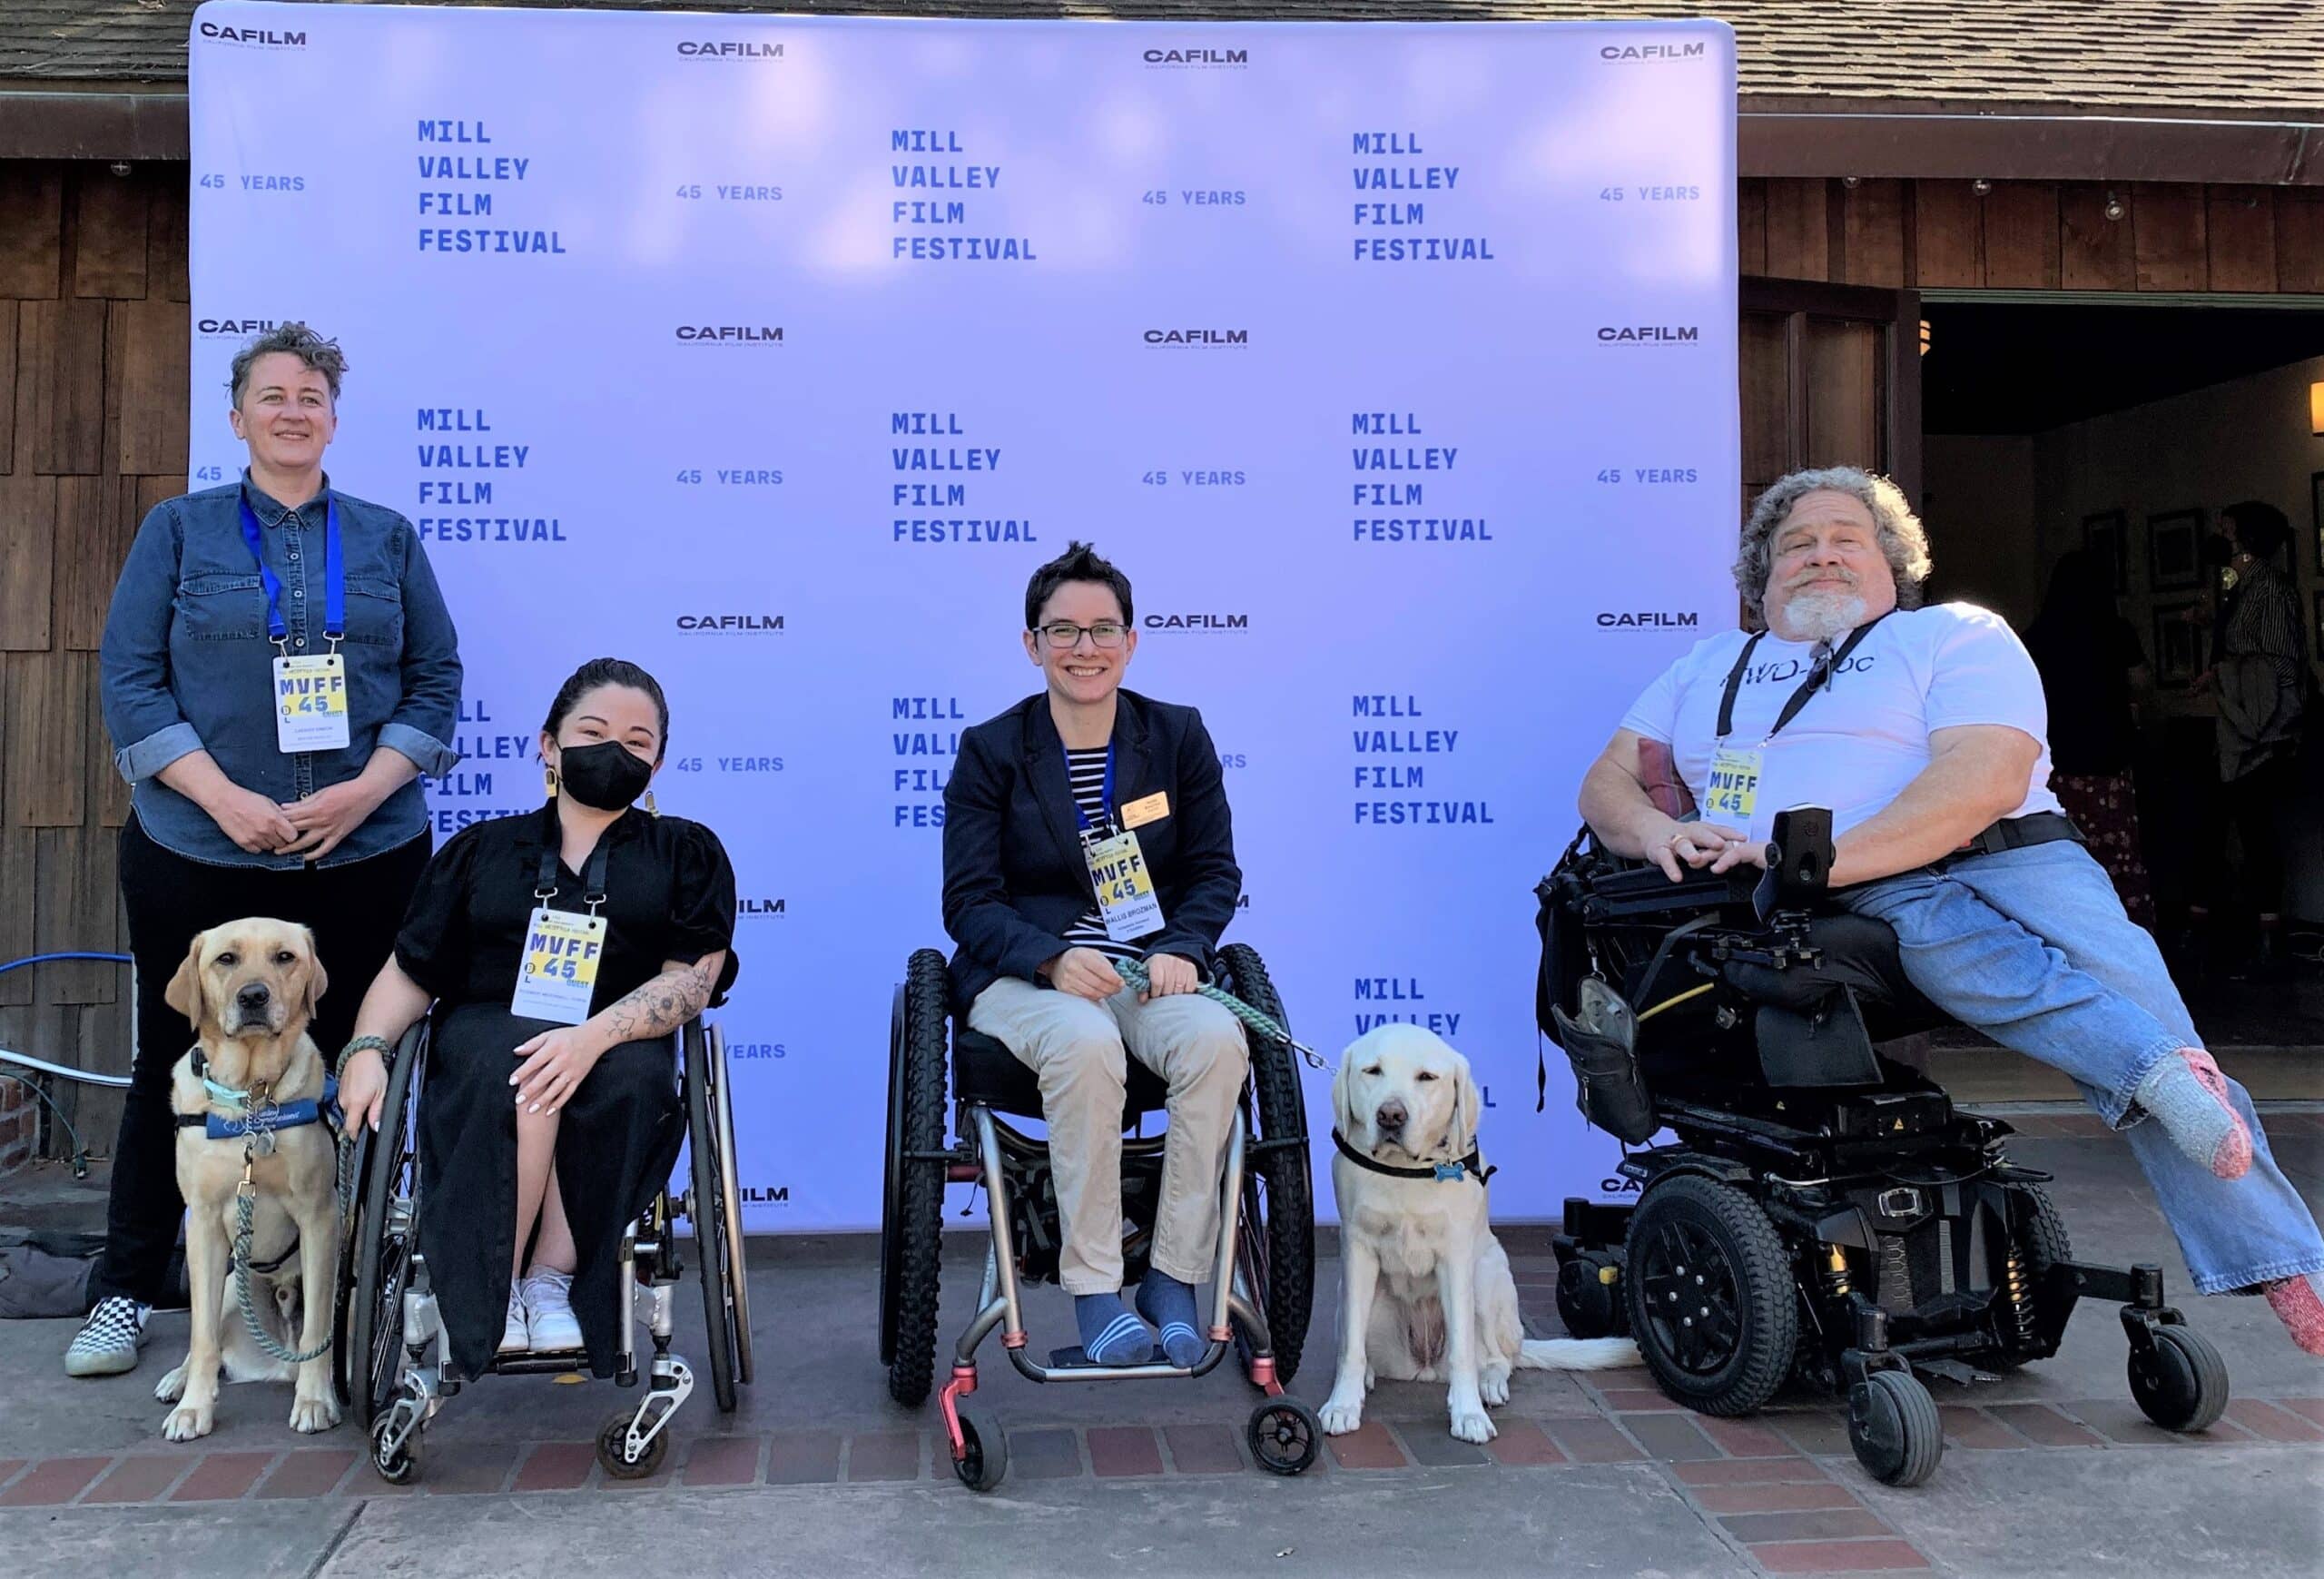 A group of people in wheelchairs with service dogs at a film festival